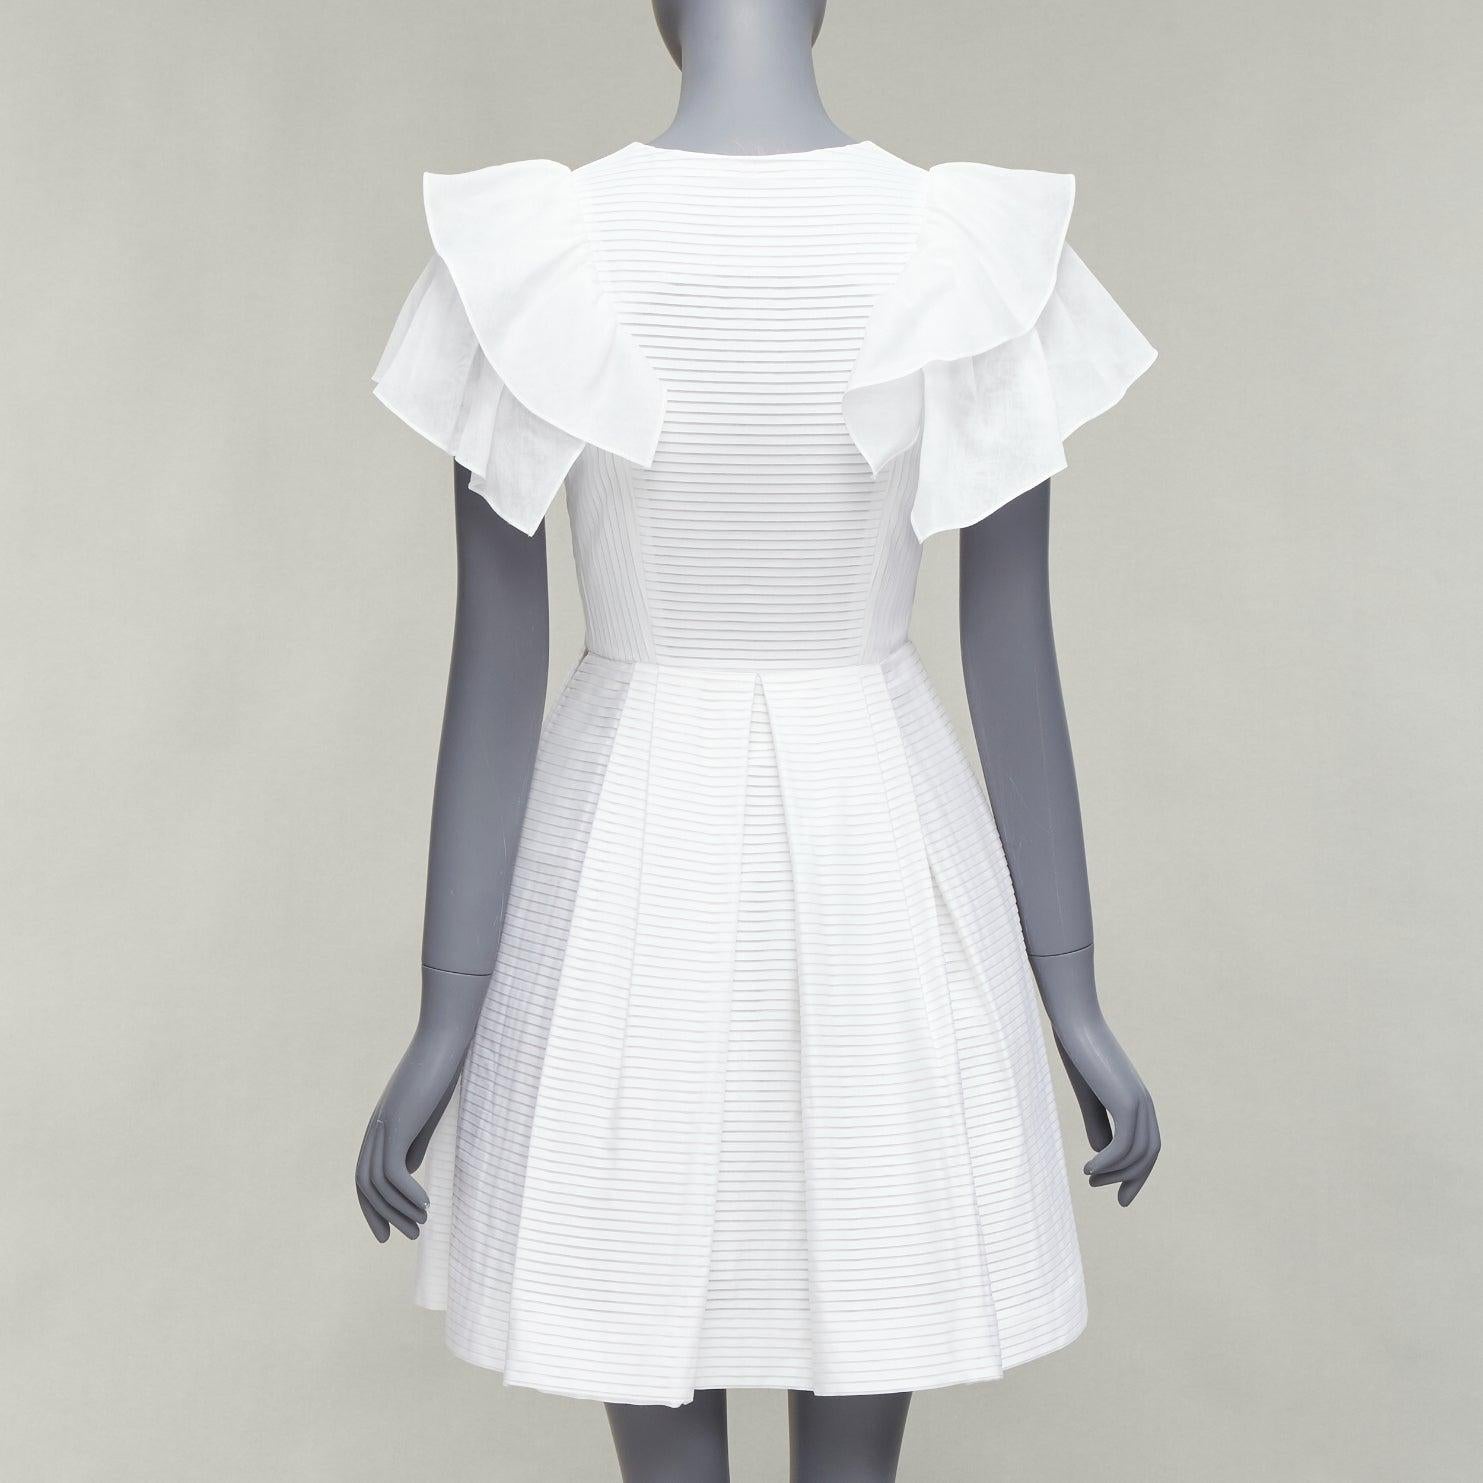 DICE KAYEK white pleated cotton ruffle sleeve fit flared cocktail dress FR34 XS 1